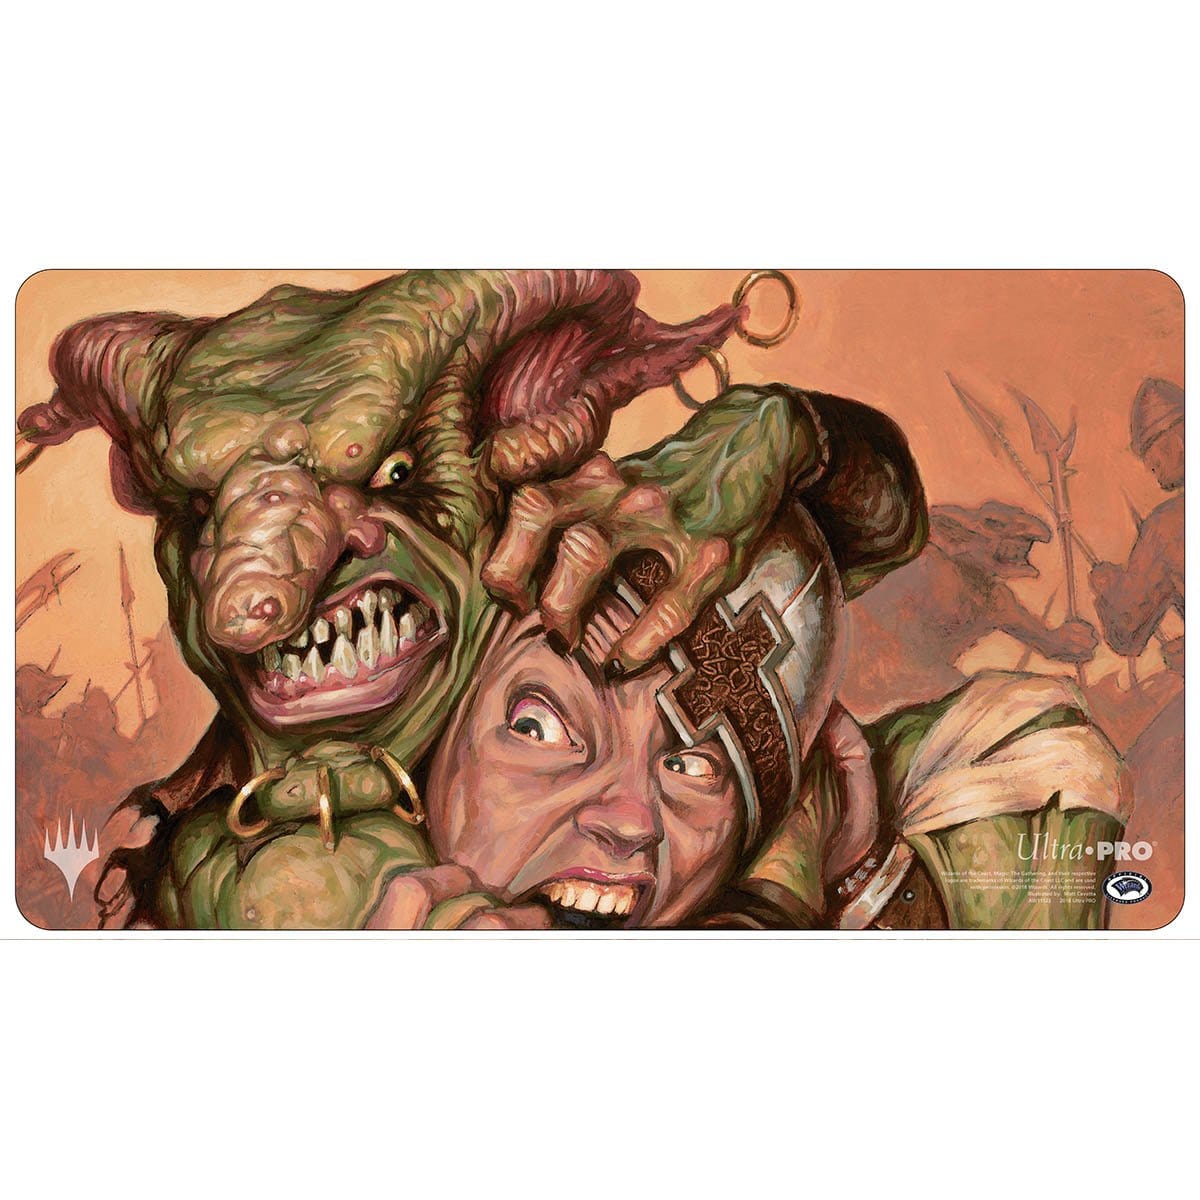 Goblin Piledriver Playmat - Playmat - Original Magic Art - Accessories for Magic the Gathering and other card games